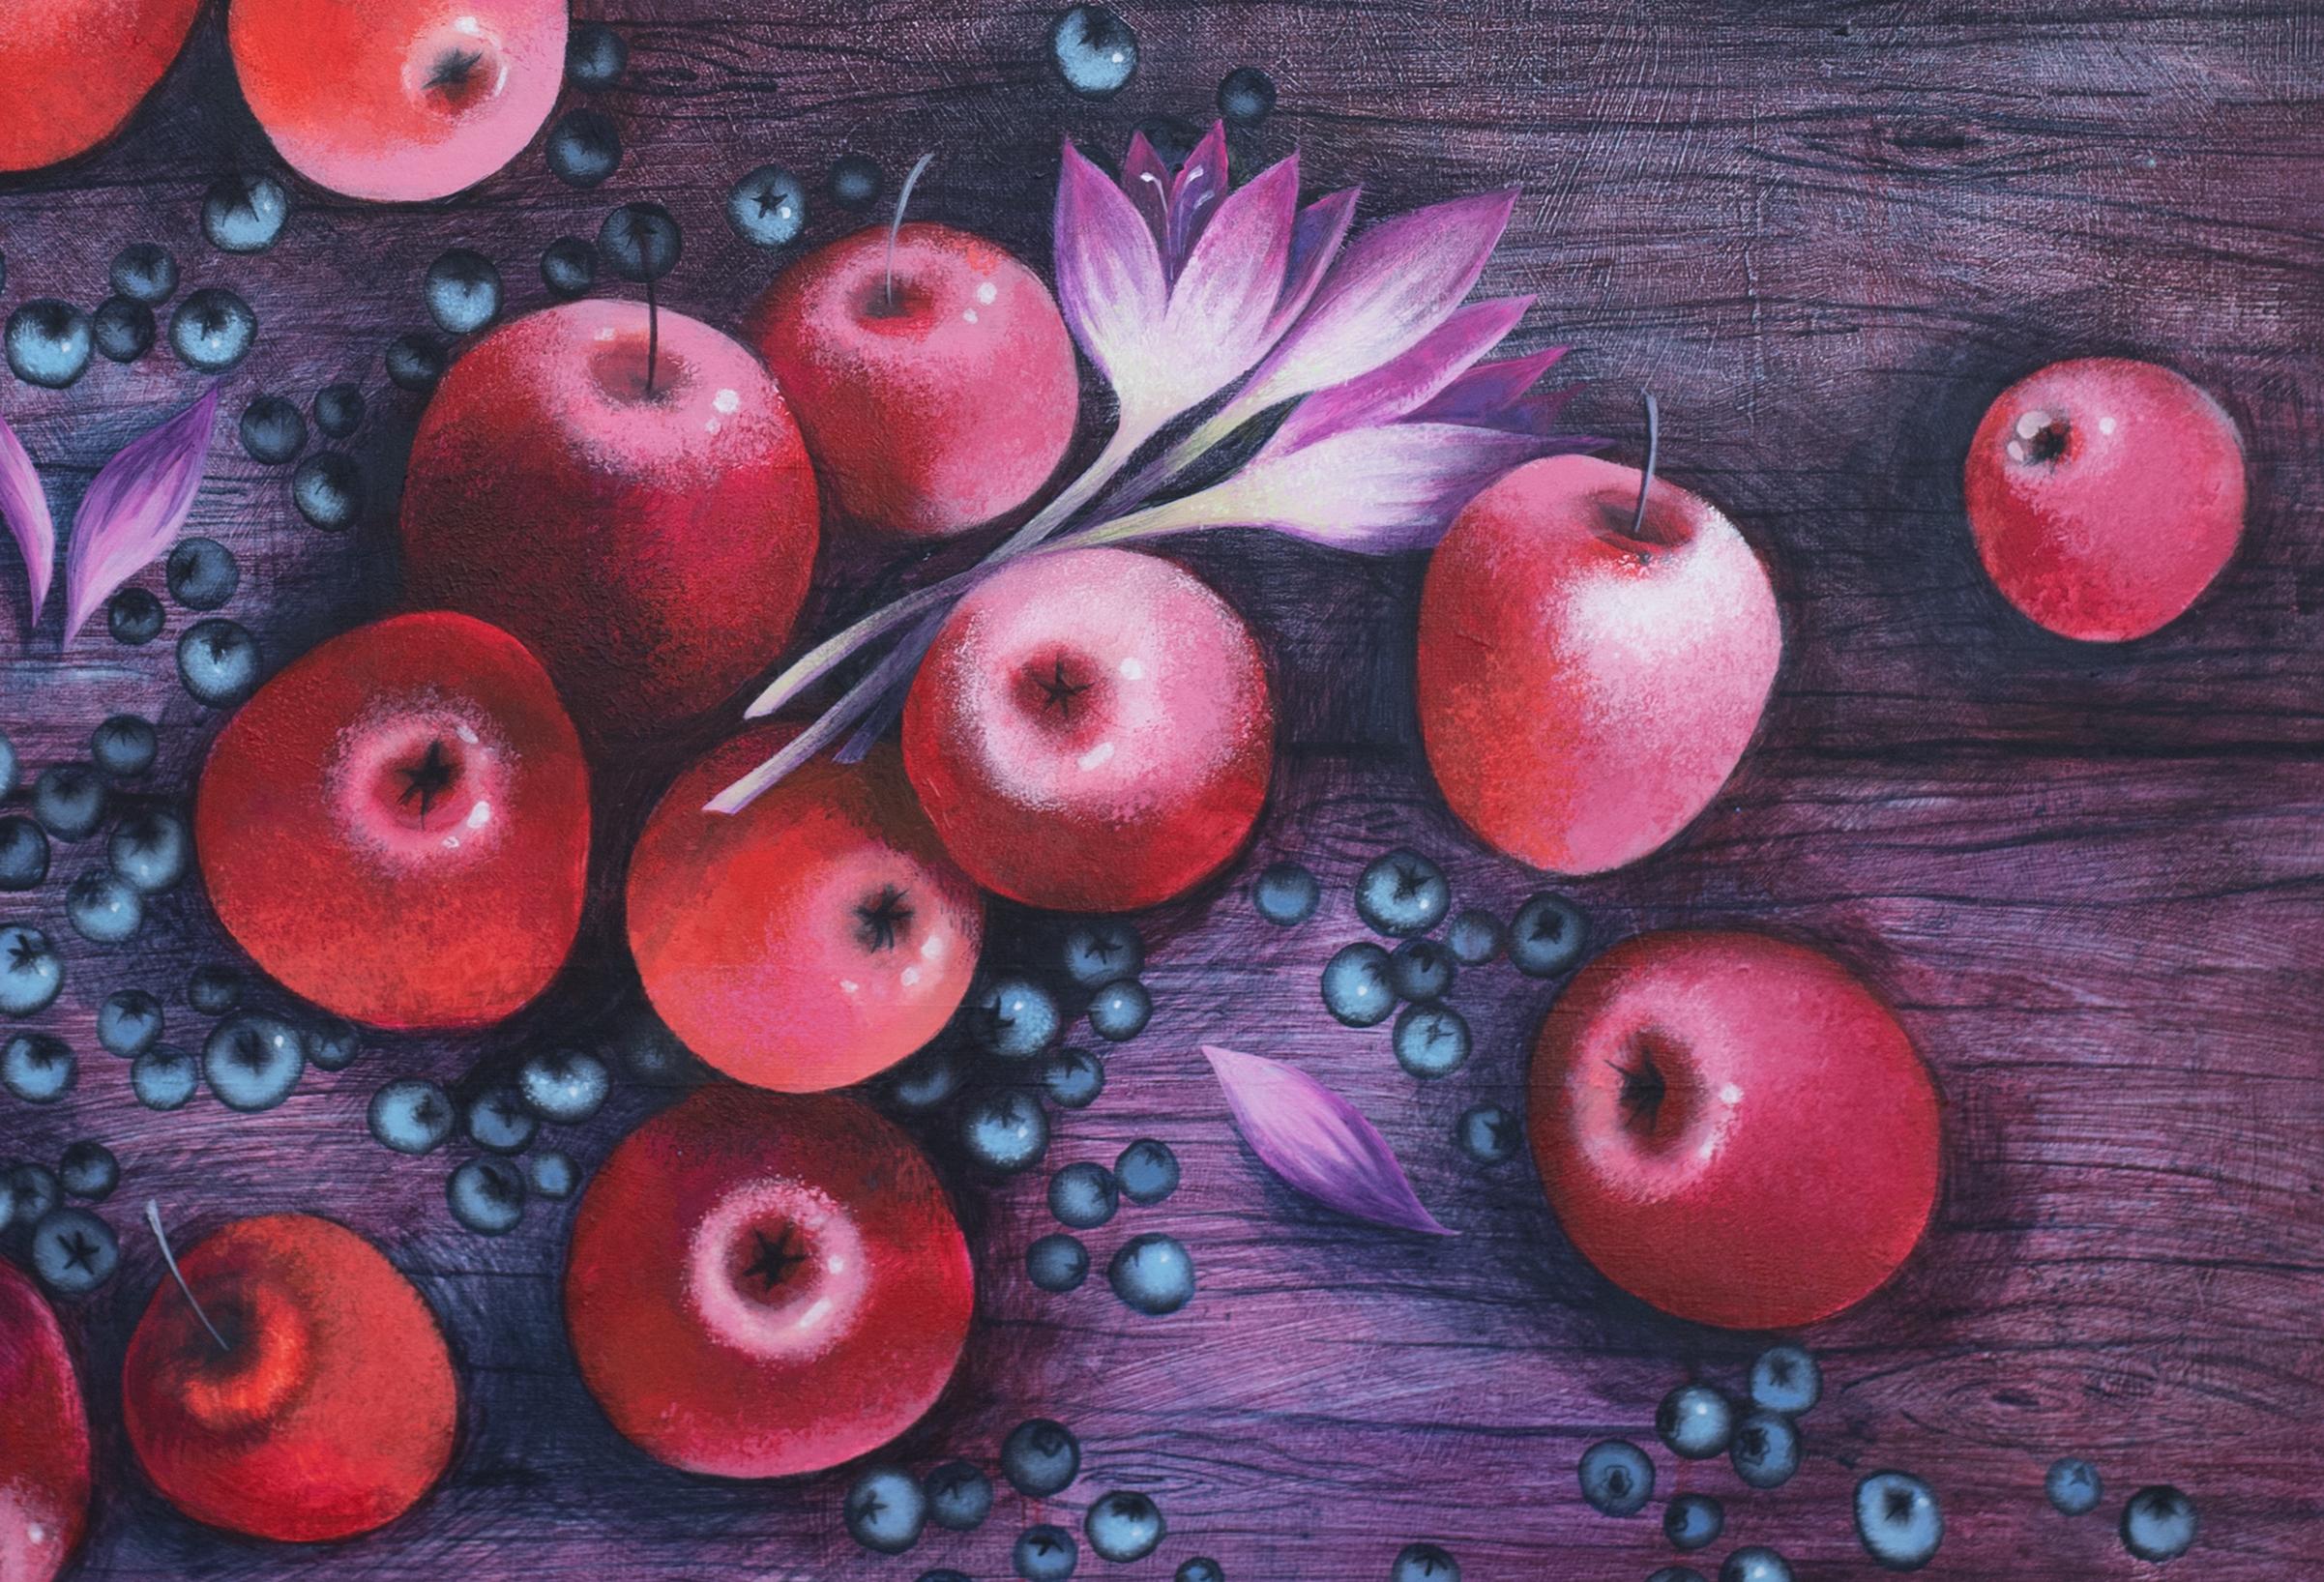 Basket of Apples - Painting by Elena Shichko